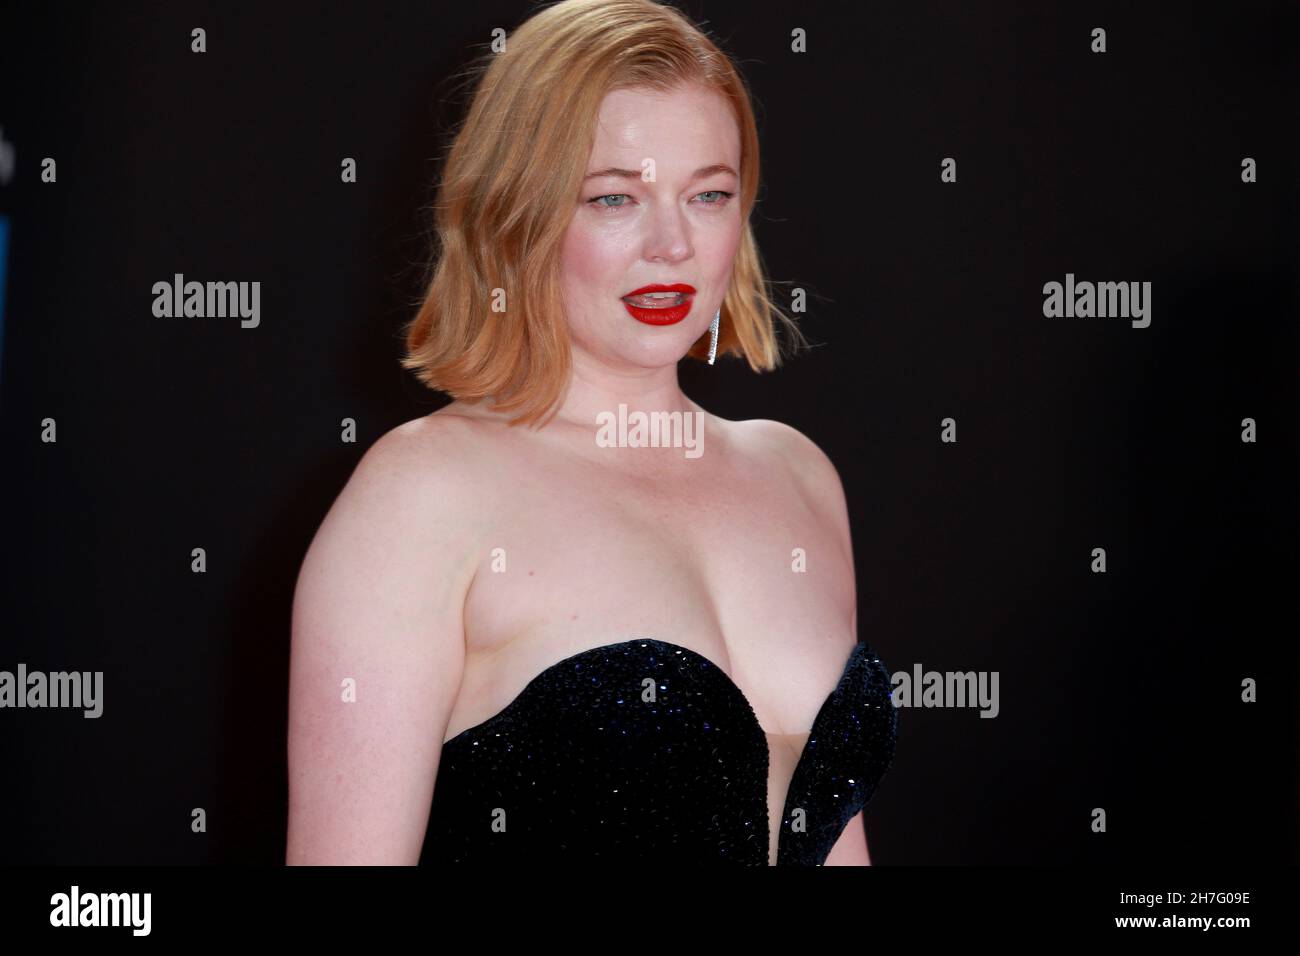 LONDON, UNITED KINGDOM - Oct 15, 2021: Sarah Snook  attends European premiere of season 3 of 'Succession' at the Royal Festival Hall the London Film F Stock Photo